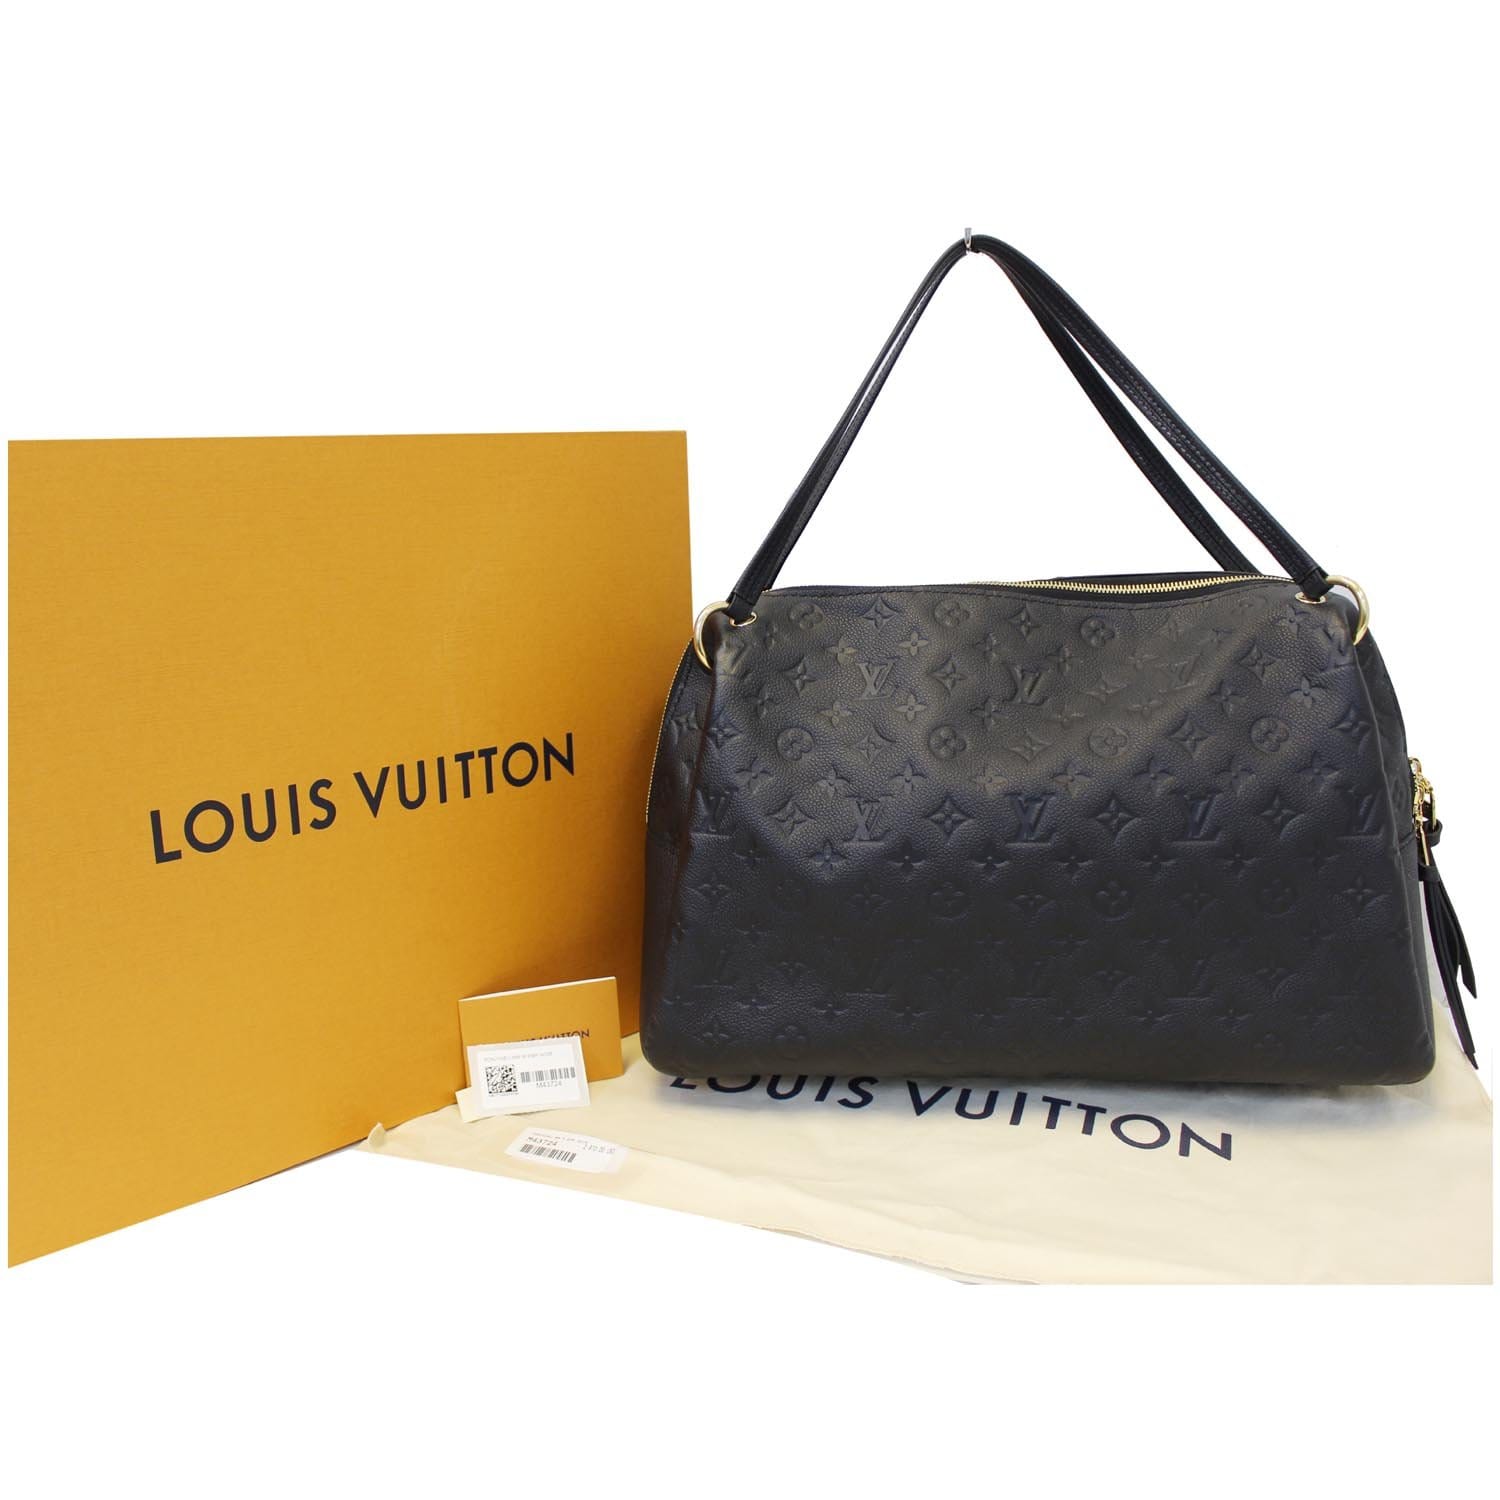 Image result for louis vuitton totally gm celebrities